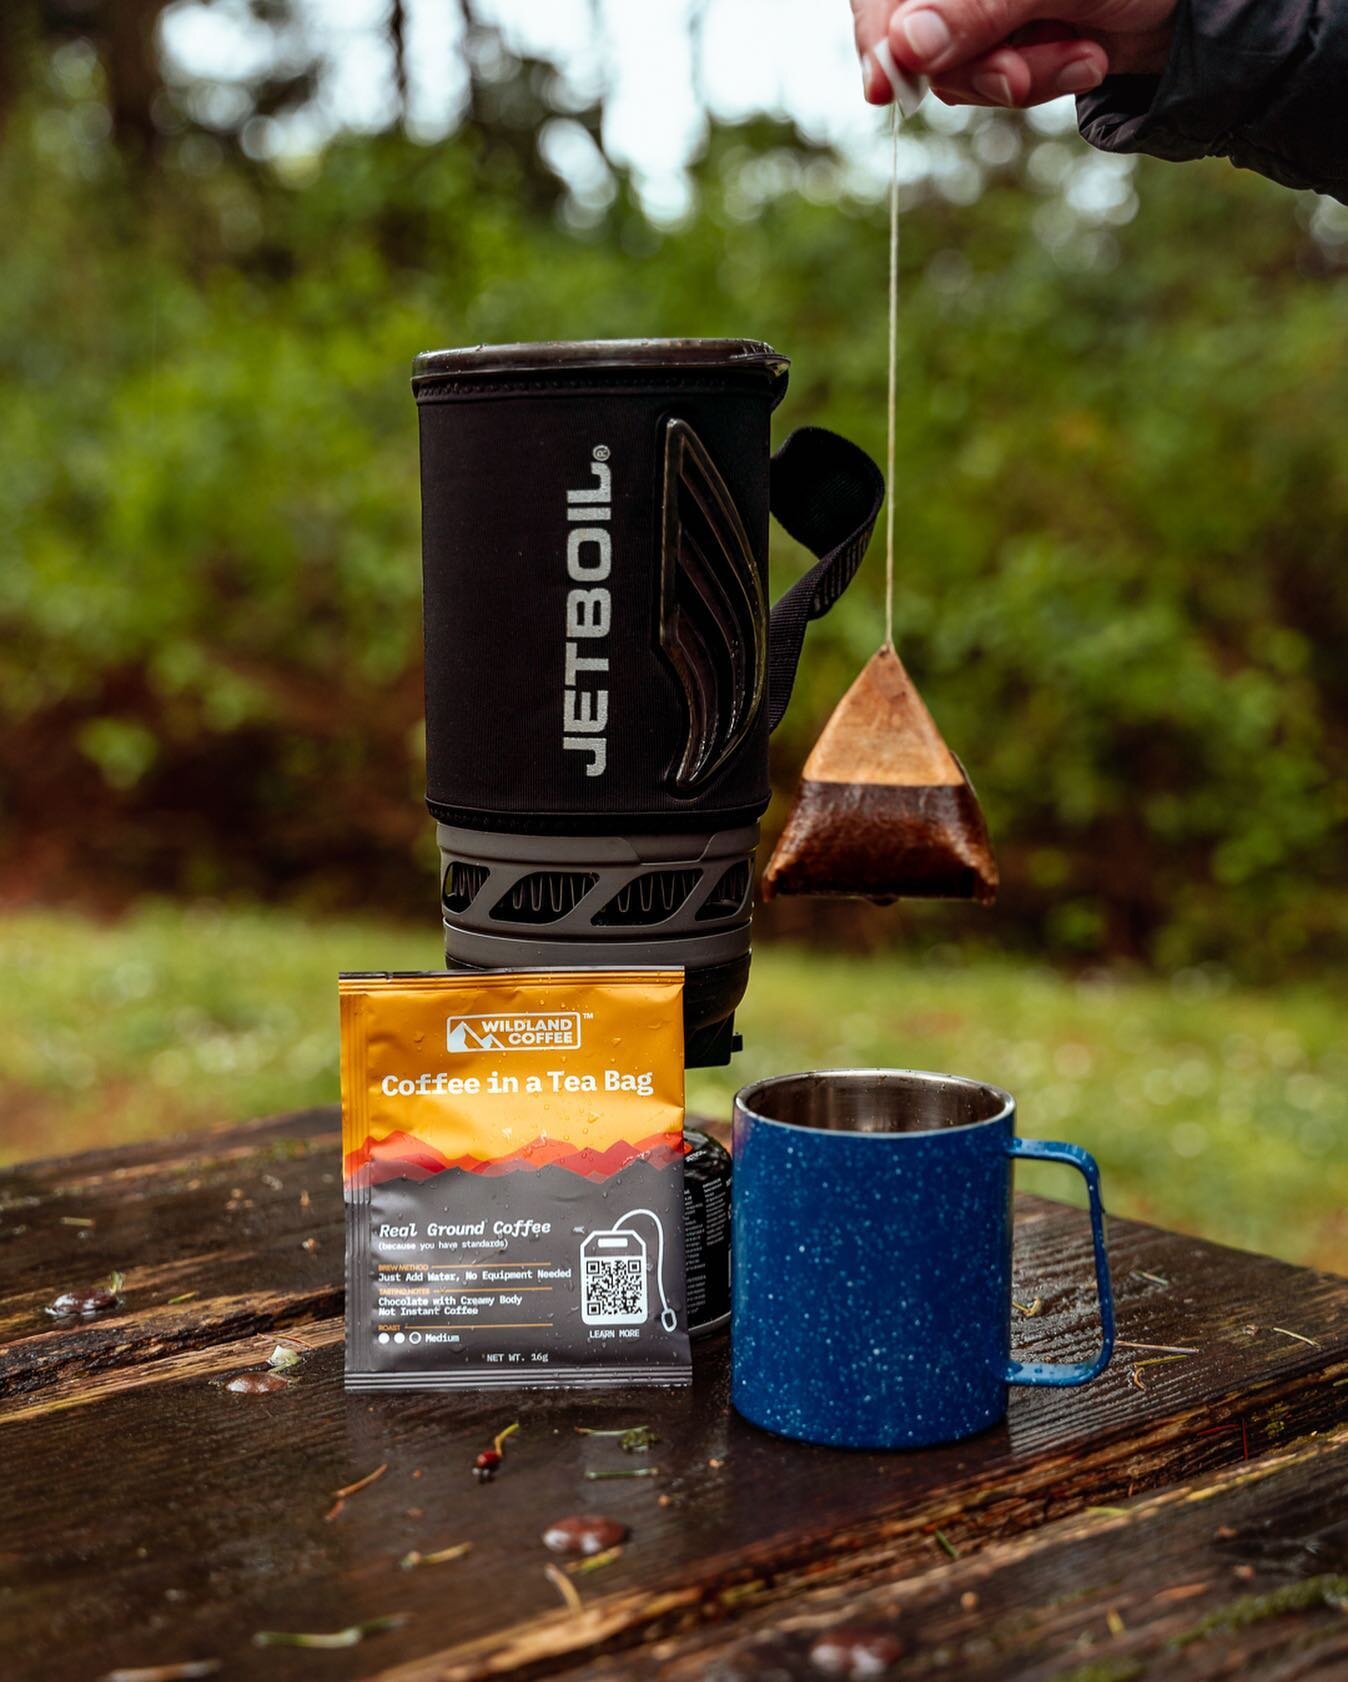 What&rsquo;s your favourite way to make coffee at the campsite?

We received some free samples from @wildlandcoffee and brought them with us on a recent camping trip. We have to say&mdash;this &lsquo;coffee in a tea bag&rsquo; idea might just be the 